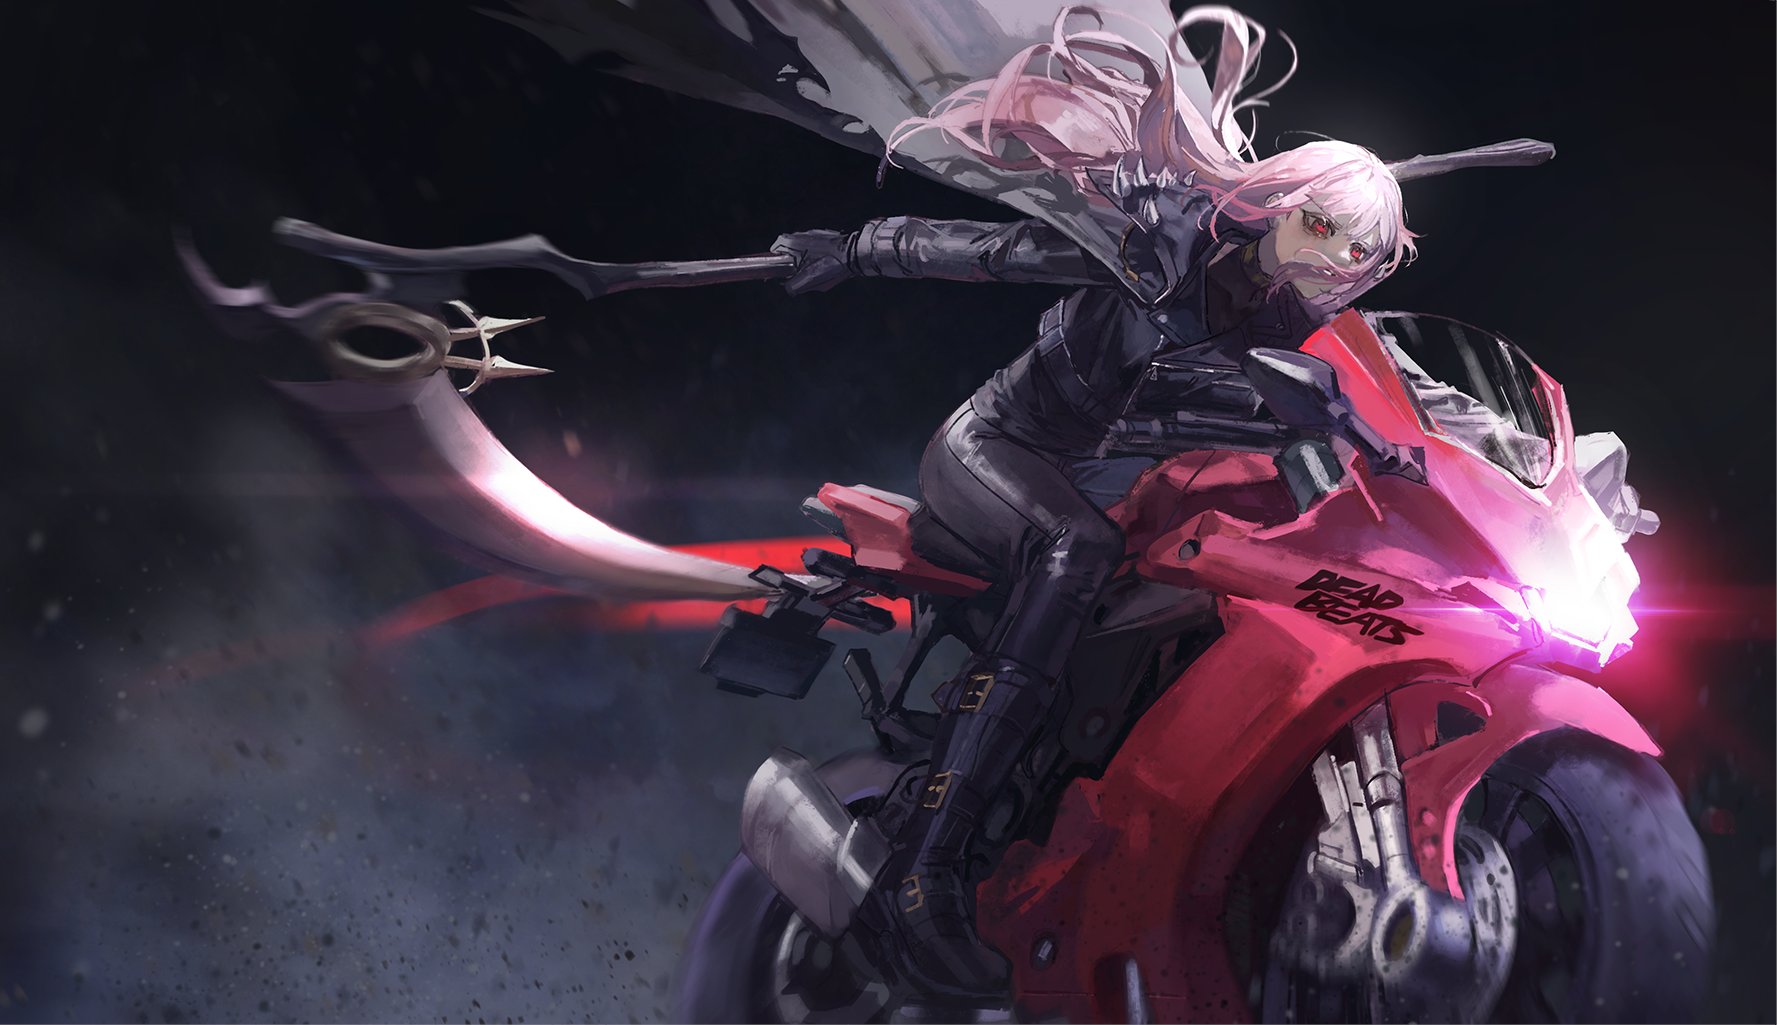 Hololive English Hololive Anime Girls Virtual Youtuber Mori Calliope Motorcycle Scythe Pink Hair Veh 1777x1025